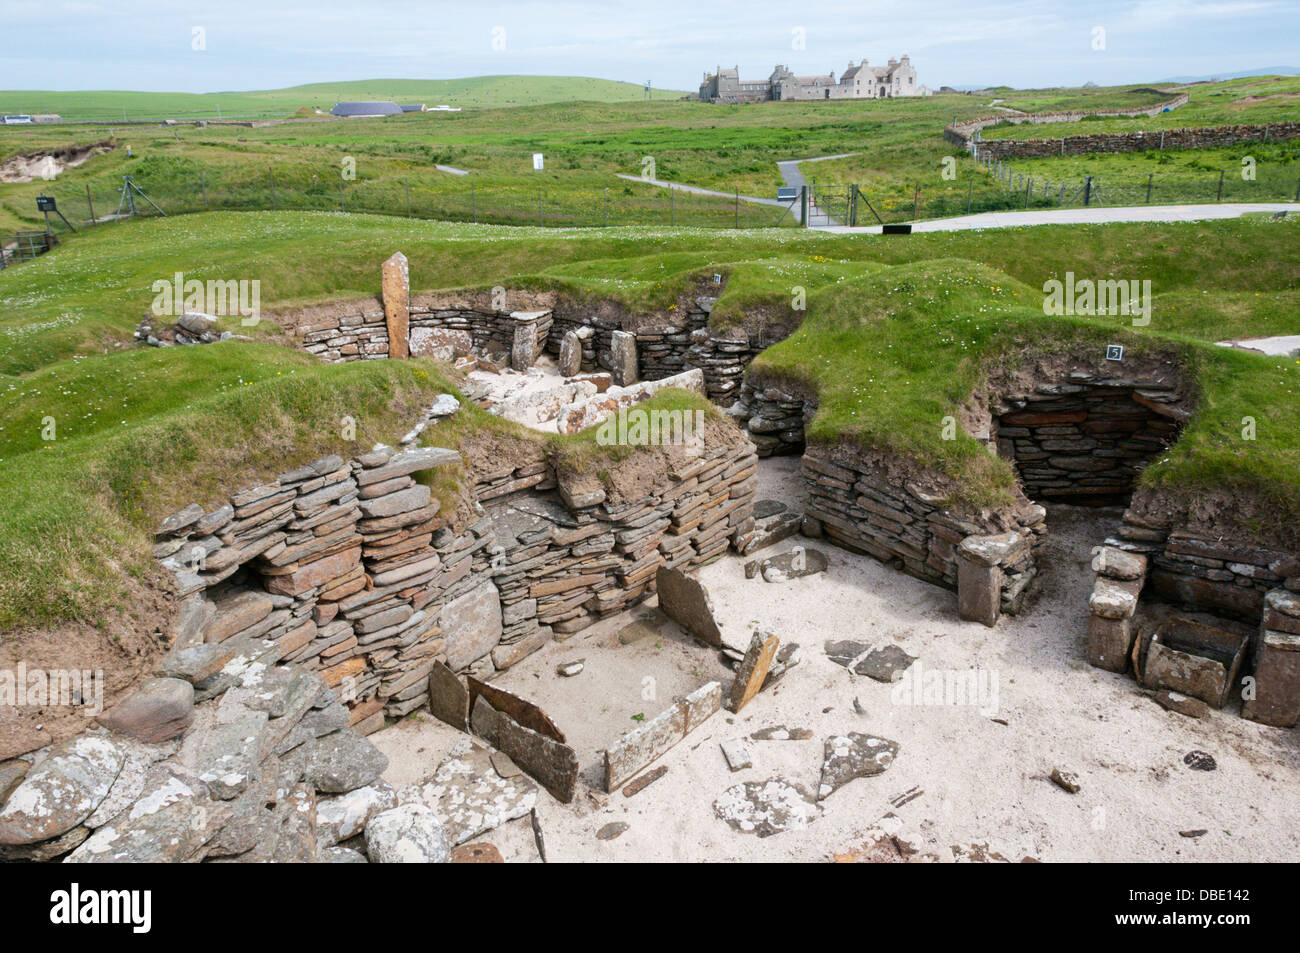 House 5 at Skara Brae Neolithic Village on Mainland Orkney with Skaill House in the background. Stock Photo